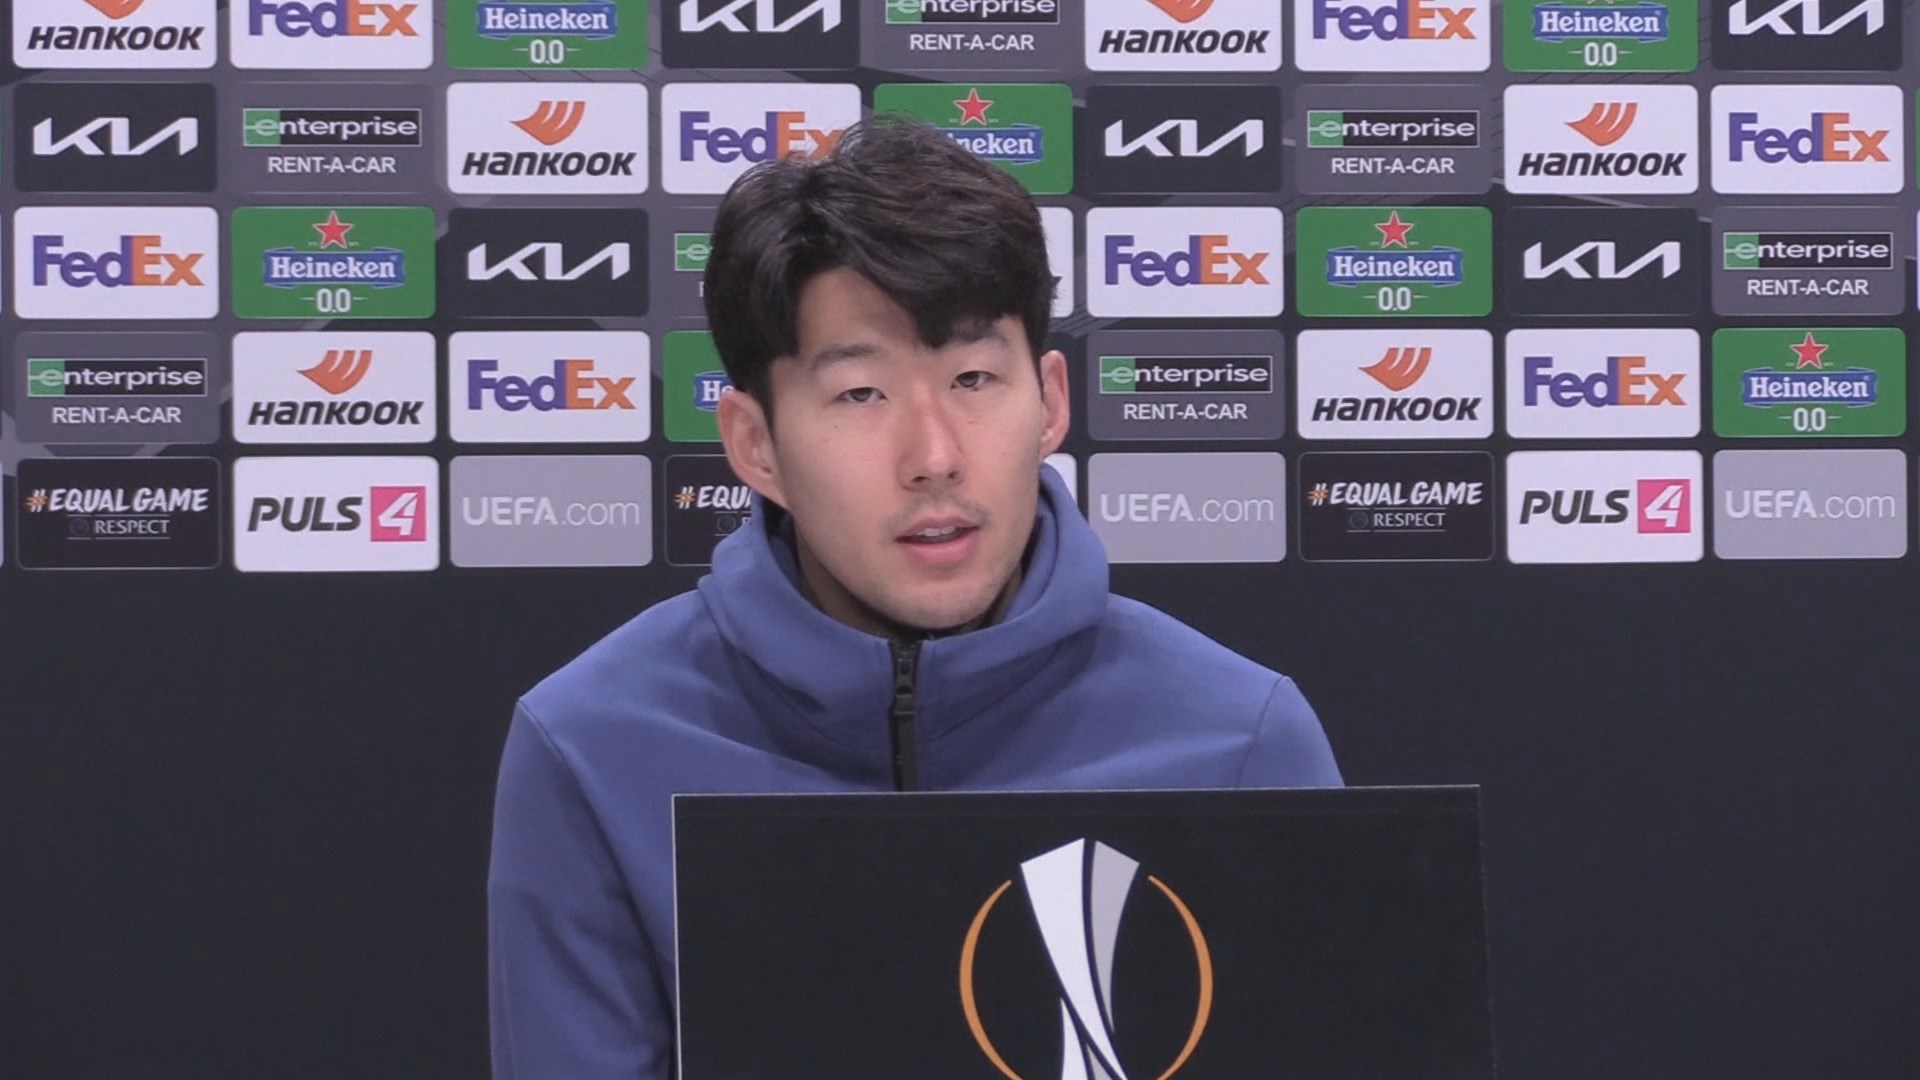 Son Heung-min, who avoided mentioning renewal of the contract, “It’s inappropriate to say right now”